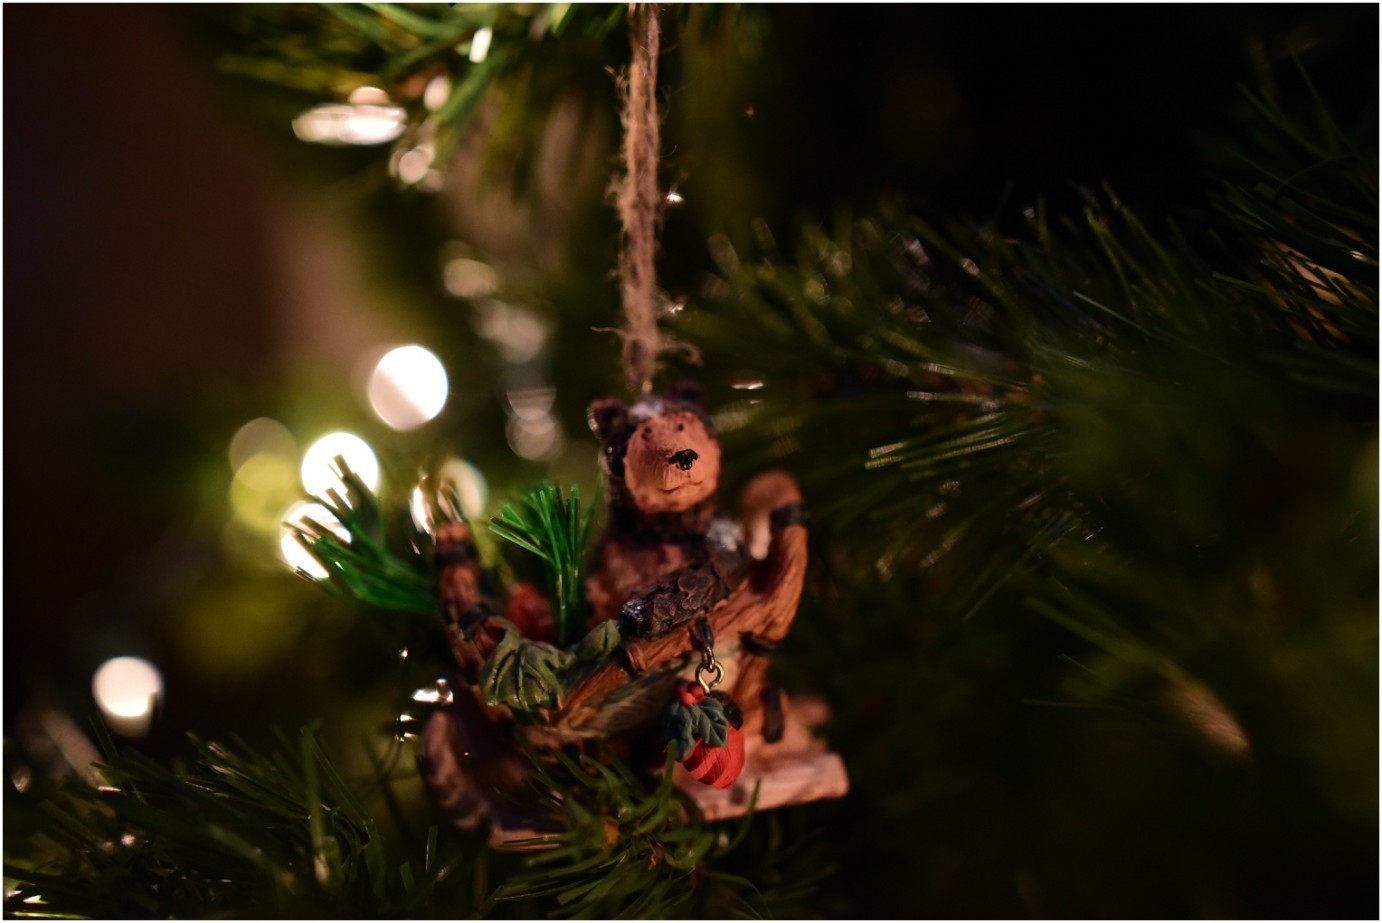 How to take beautiful photos of your christmas tree Christmas tree ornaments with 24 mm lens photo